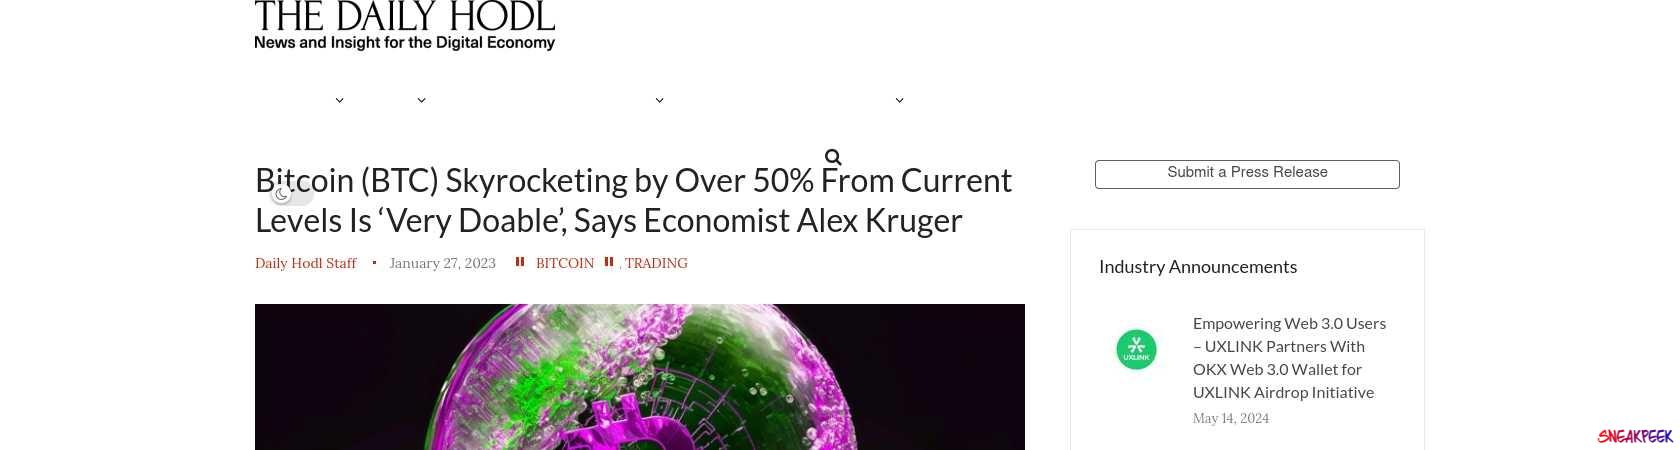 Read the full Article:  ⭲ Bitcoin (BTC) Skyrocketing by Over 50% From Current Levels Is ‘Very Doable’, Says Economist Alex Kruger